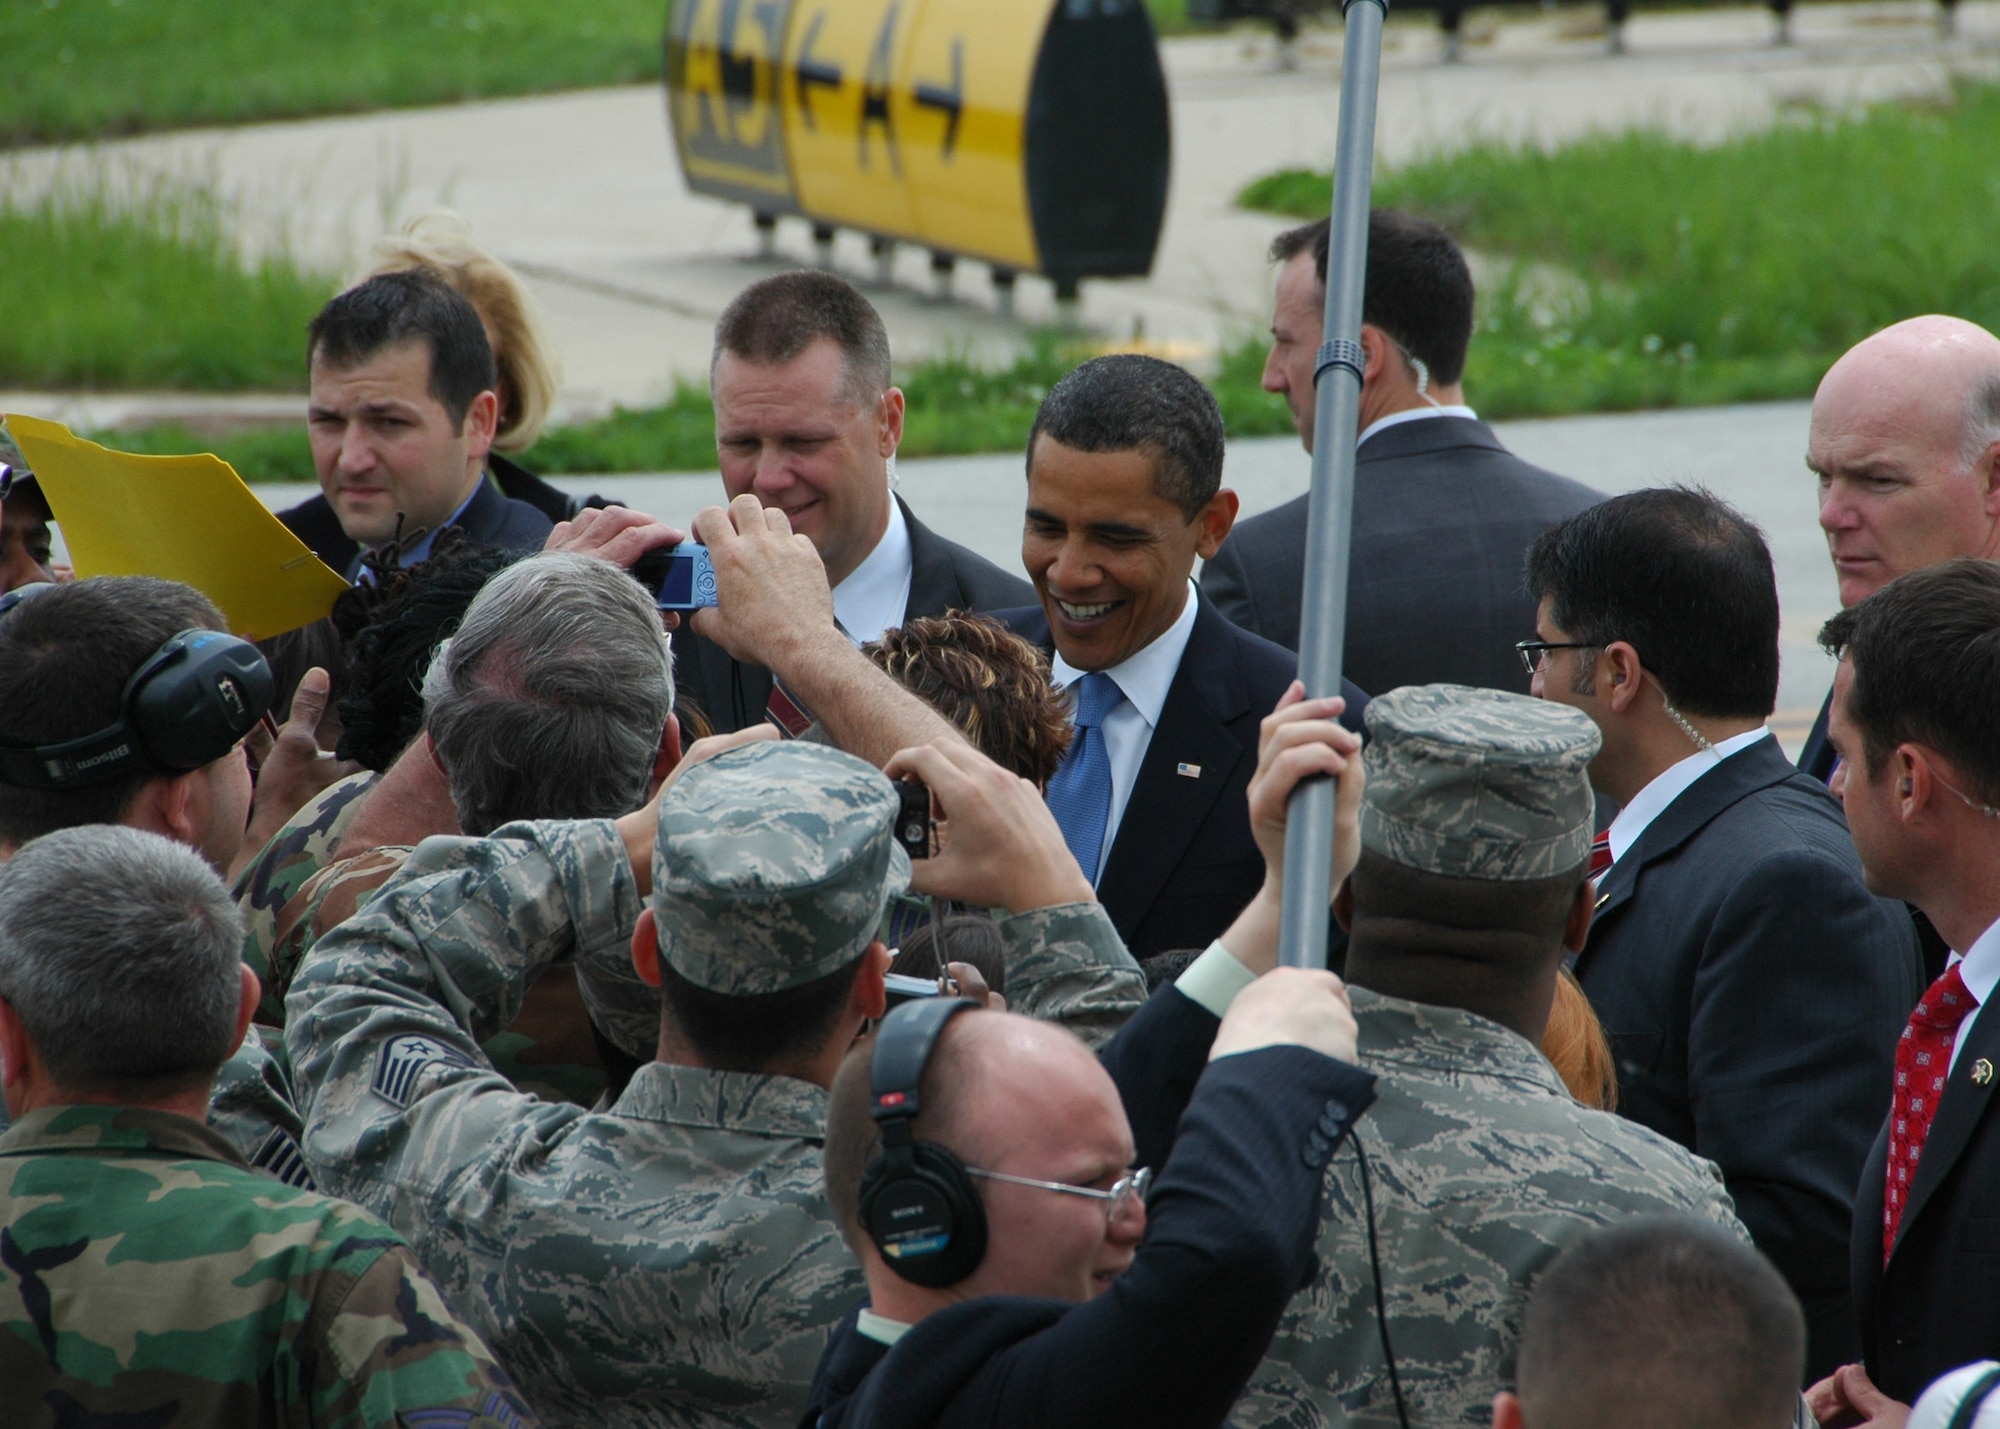 President Barack Obama greets members of the 131st Fighter Wing, Missouri Air National Guard, at Lambert-Saint Louis International Airport prior to his departure on Air Force One on April 29.  President Obama marked his 100th day in office with a Town Hall Meeting in Arnold, a surburb of Saint Louis, earlier that day. (U.S. Air Force Photo by Master Sergeant Mary-Dale Amison)  (RELEASED)